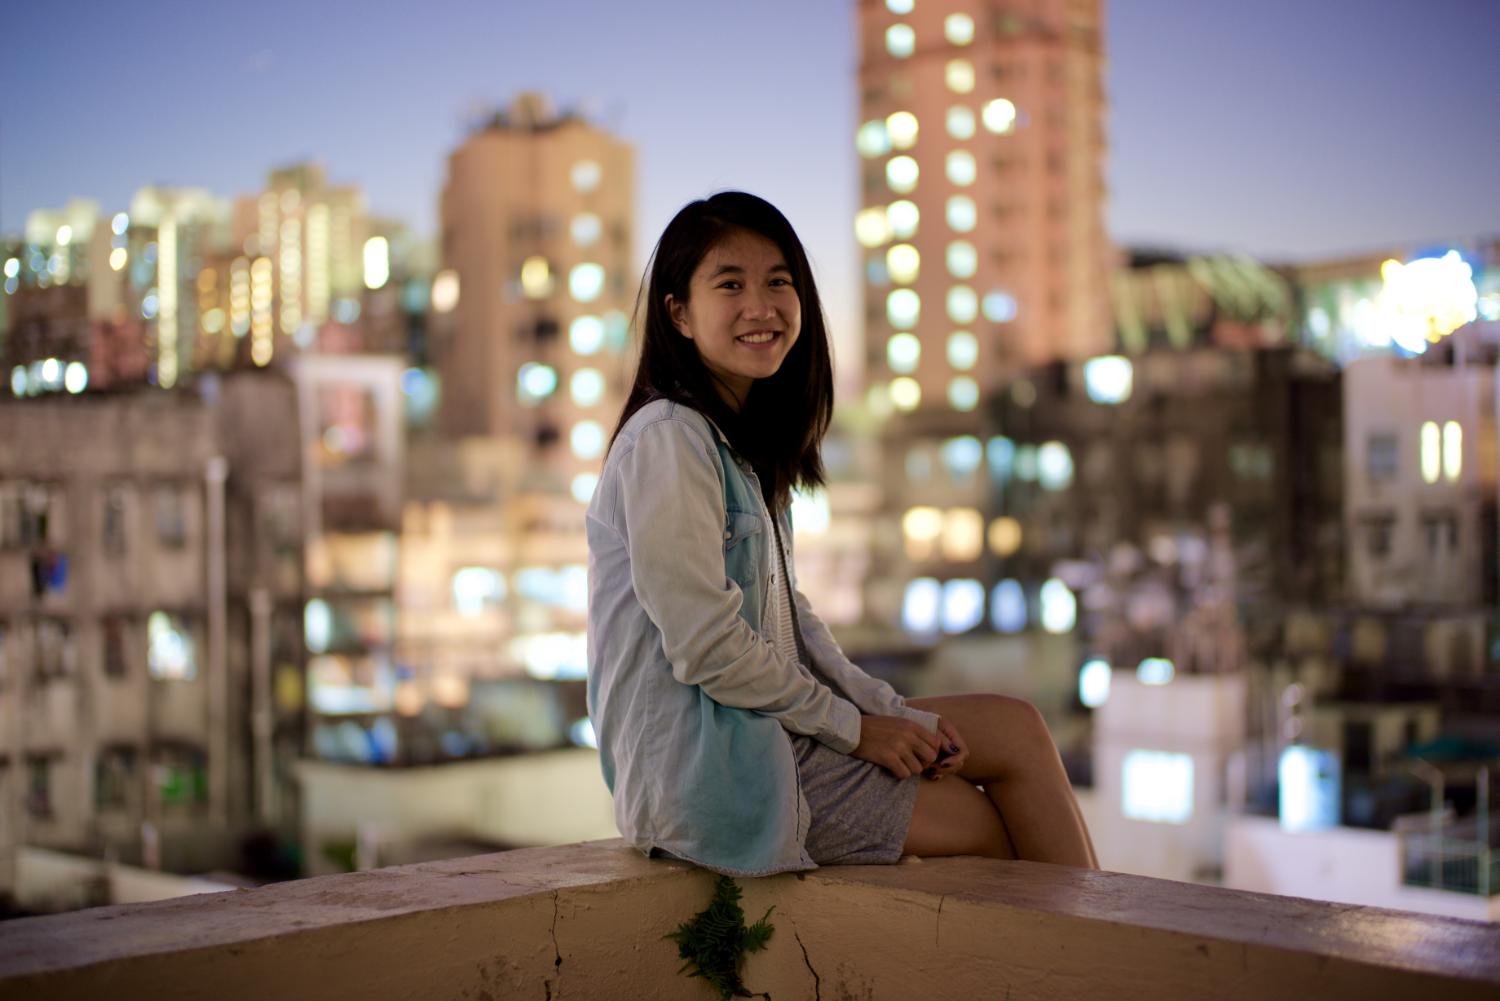 Claudia sitting on a ledge with city lights in the background